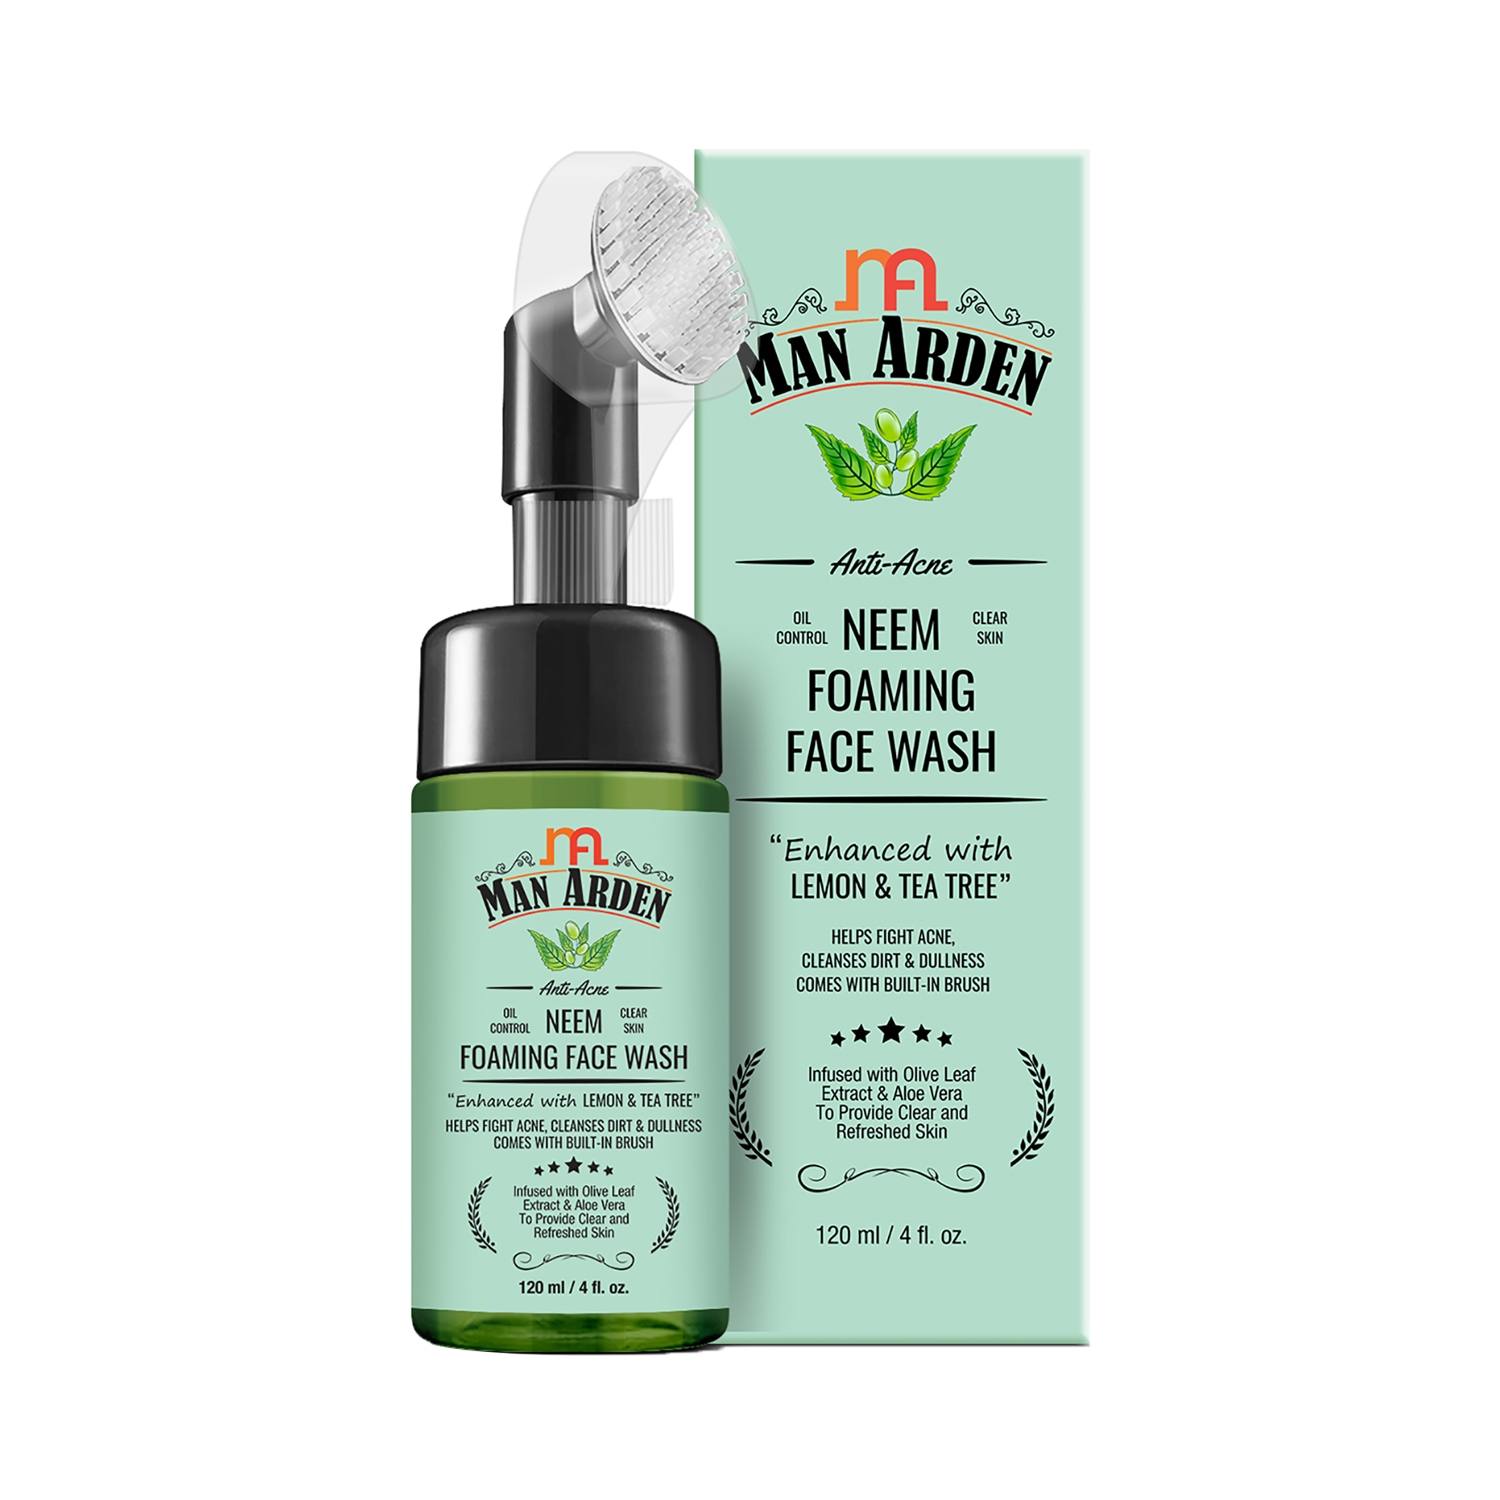 Man Arden | Man Arden Anti-Acne Neem Foaming Face Wash With Built-In Brush Helps Fight Acne, Cleanses Dirt & Dullness Infused With Olive Leaf Extract & Aloe Vera (120ml)